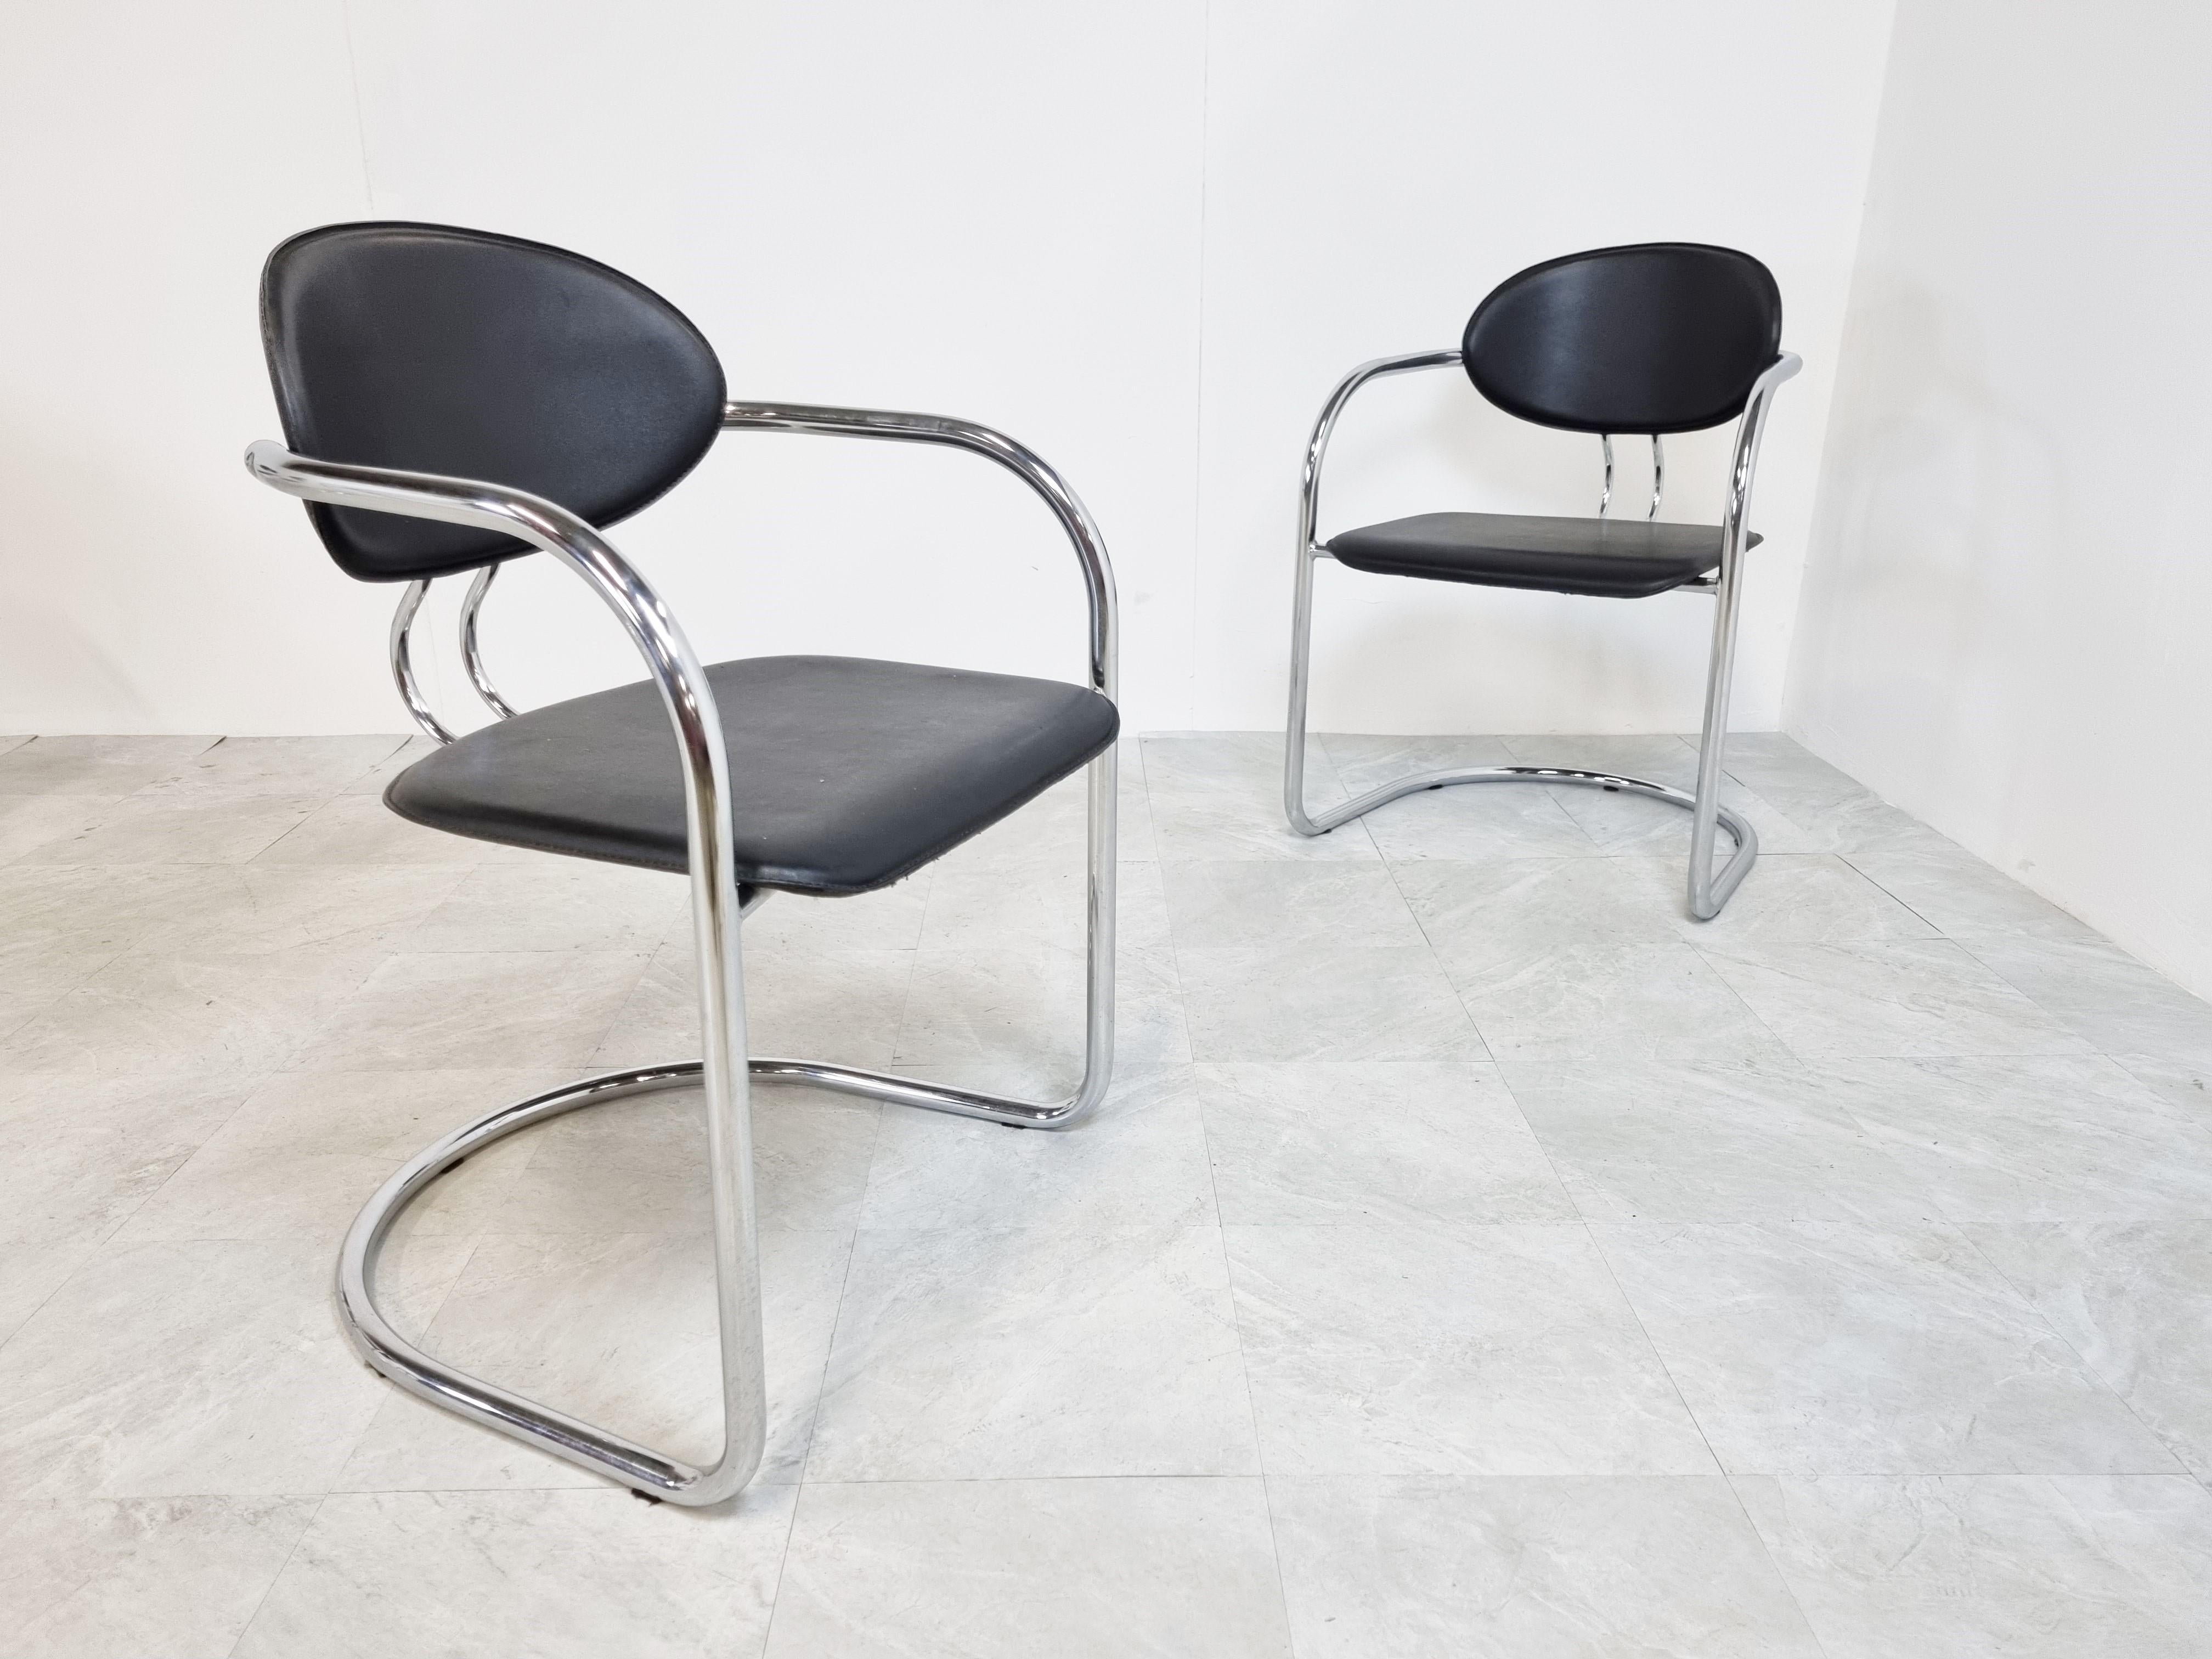 Tubular chrome and black leather cantilever italian dining chairs.

Beautifully shaped tubular frame with a nicely designed backrest.

1970s, Italy

Good overall condition with normal age related wear.

Dimensions:

Height: